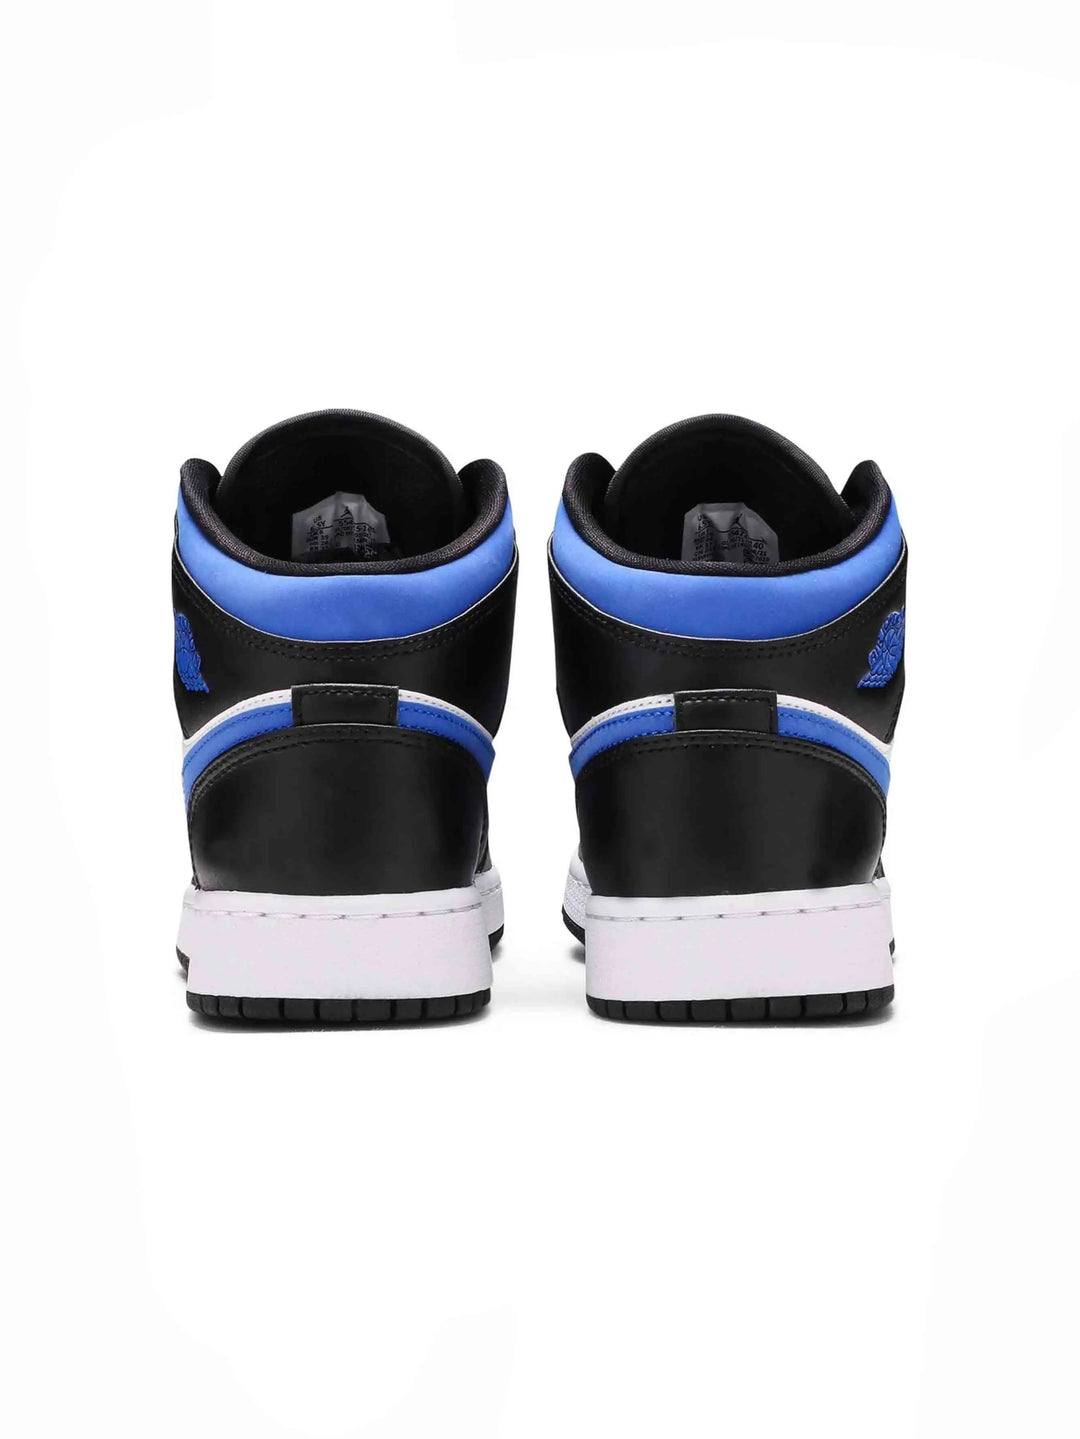 Nike Air Jordan 1 Mid White Black Racer Blue (GS) in Auckland, New Zealand - Shop name